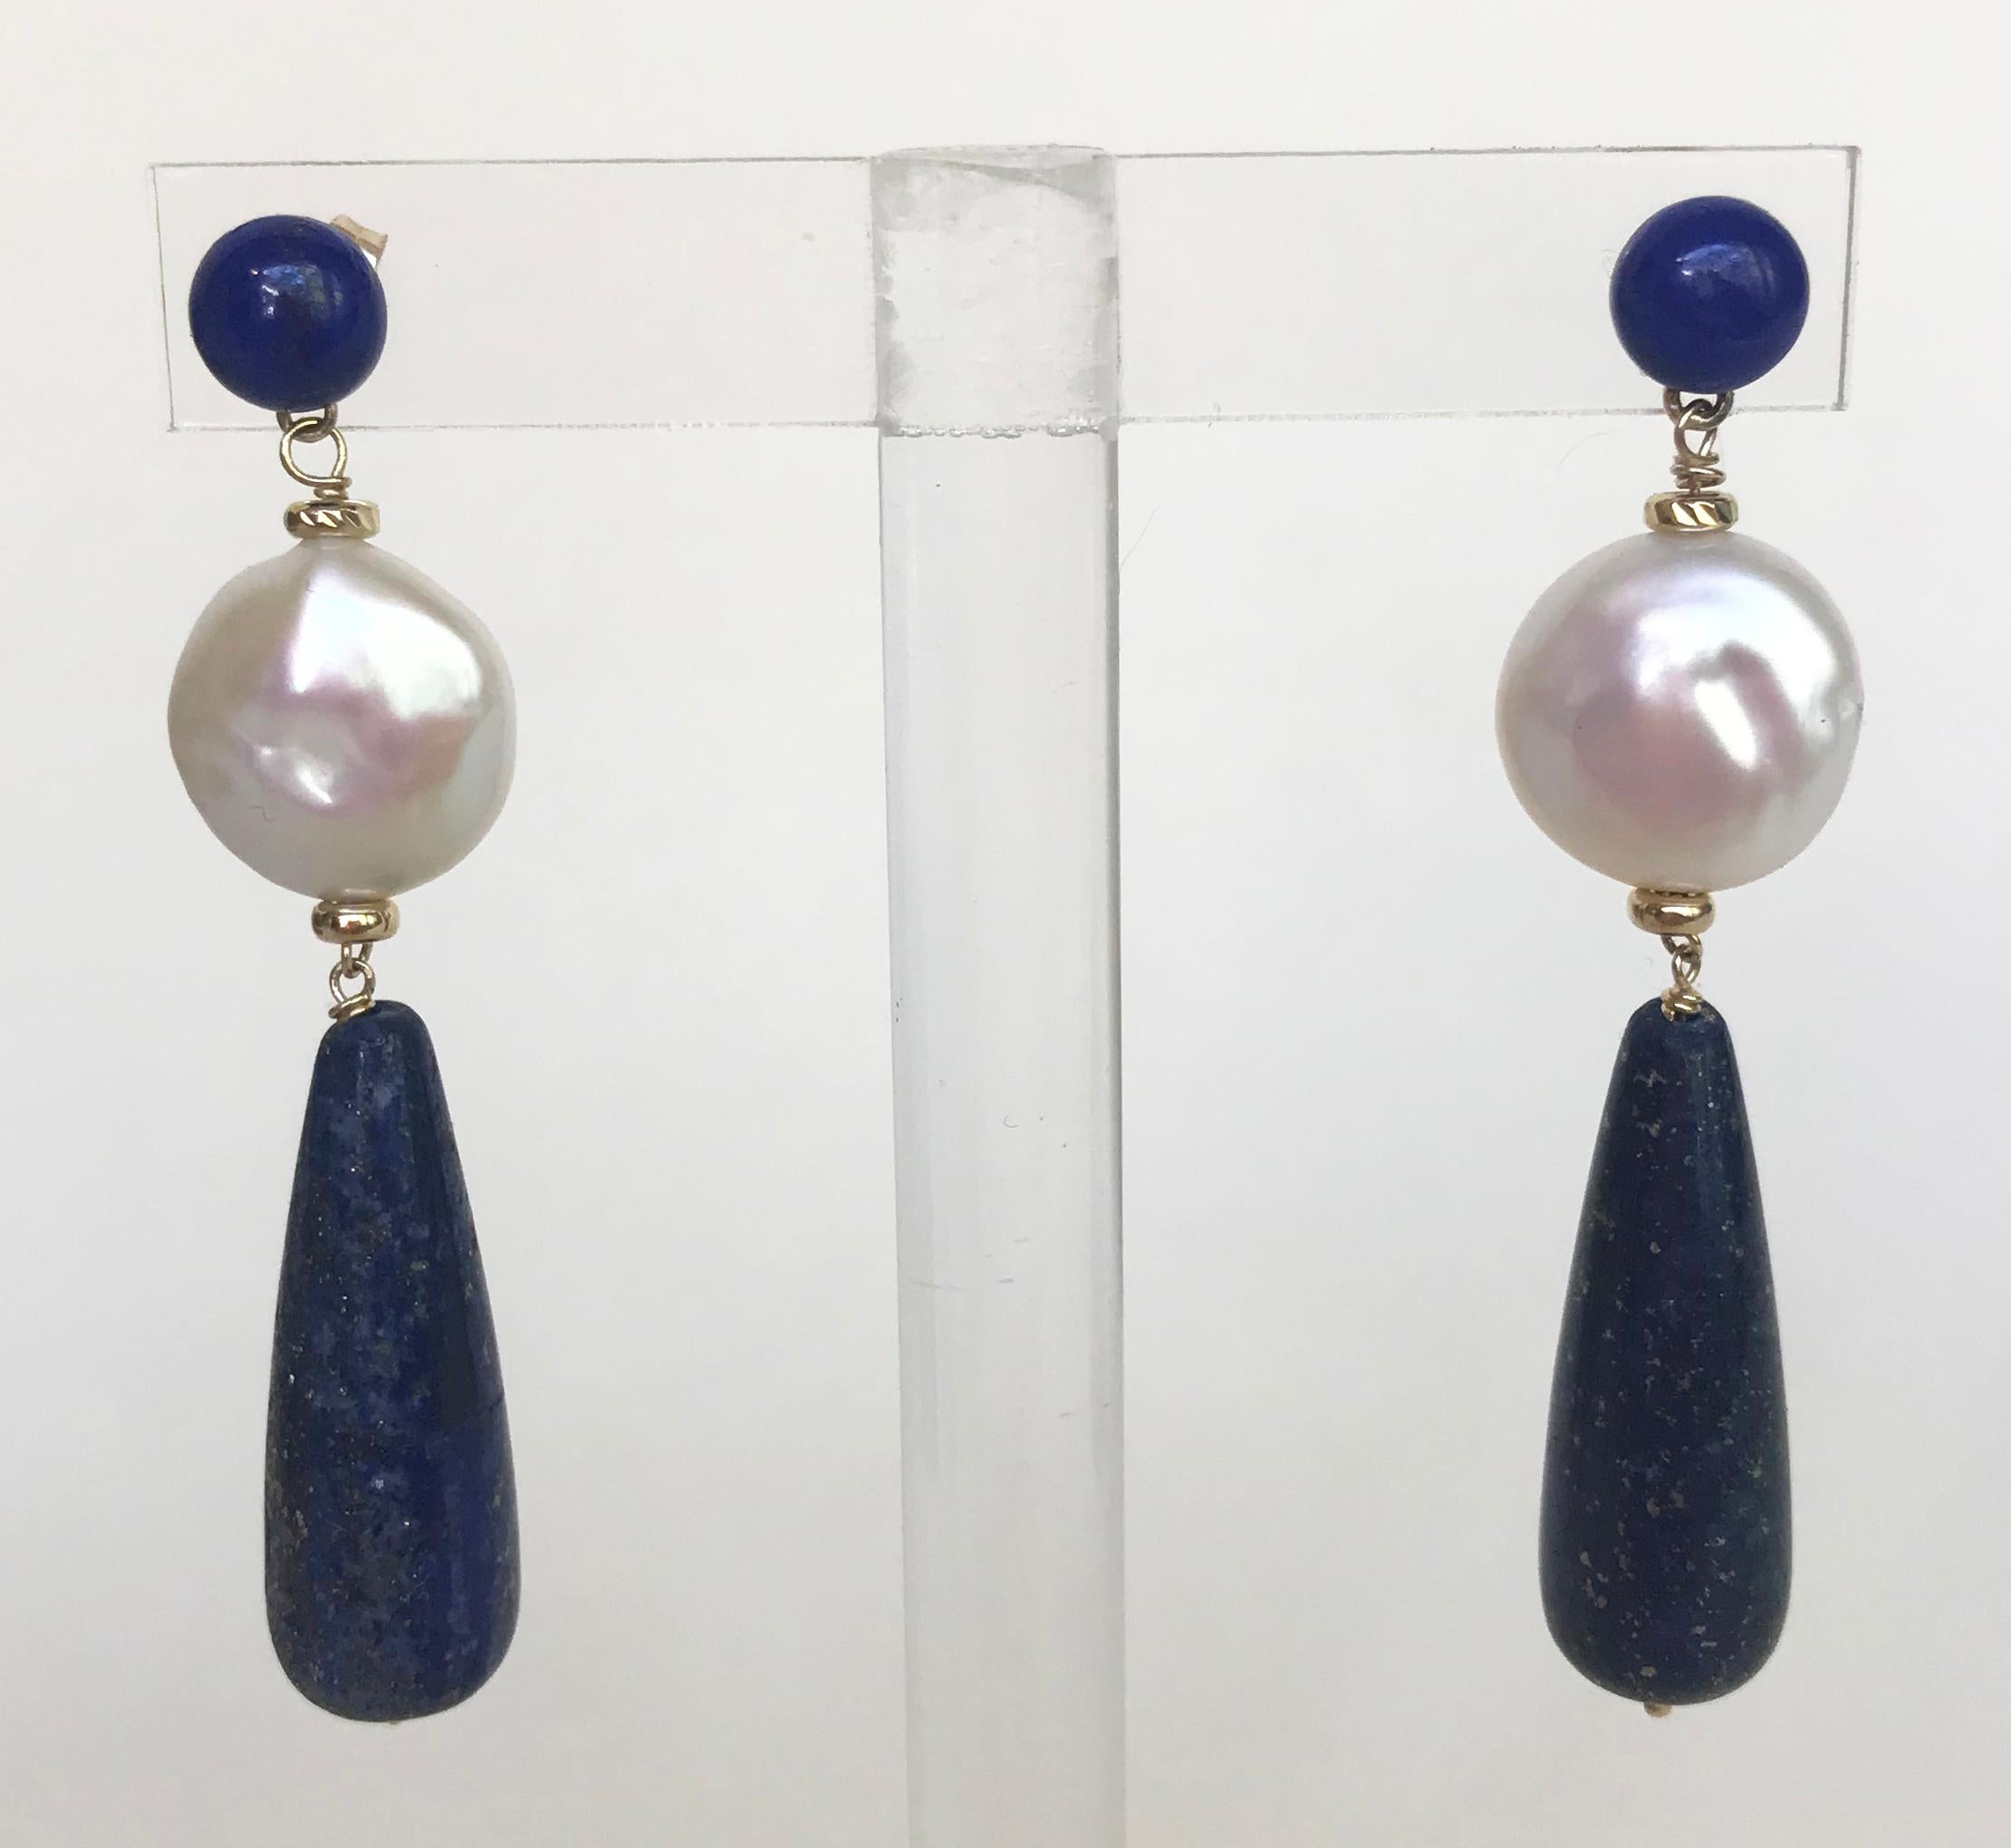 Marina J. stunning collection presents this new wonderful piece made from a 14k yellow gold wiring and stud. The stud showcase an elegant lapis lazuli bead  with a 14k yellow gold rondel on top of a pearl coin. To finish the look, a lapis lazuli